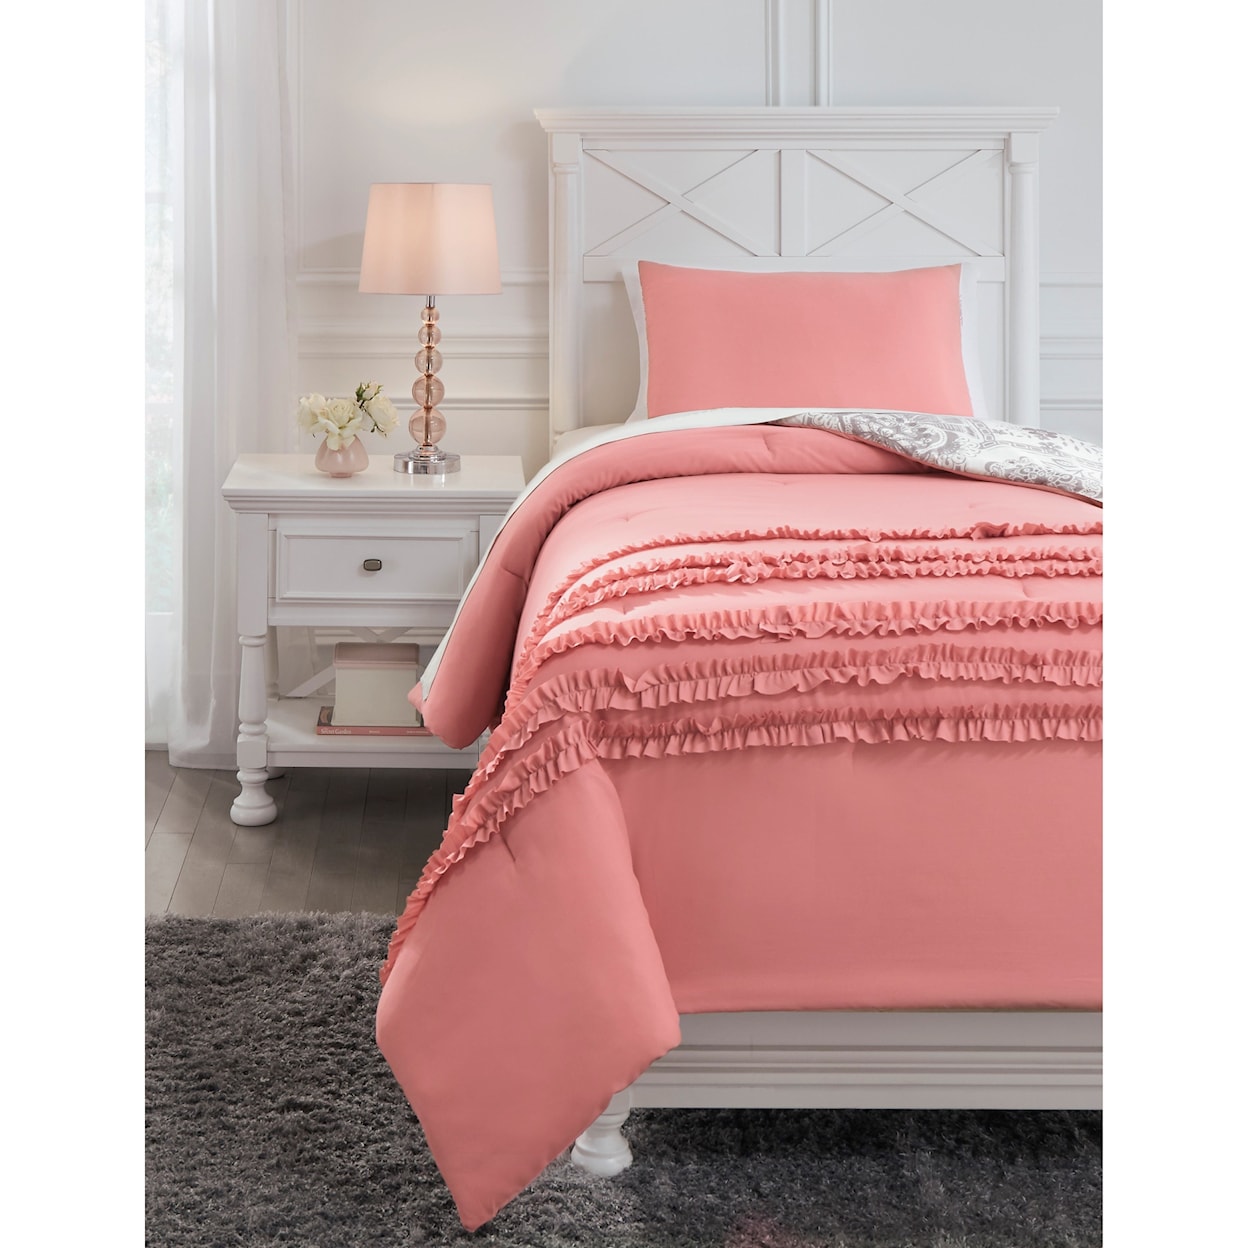 Signature Design by Ashley Bedding Sets Twin Avaleigh Pink/White/Gray Comforter Set